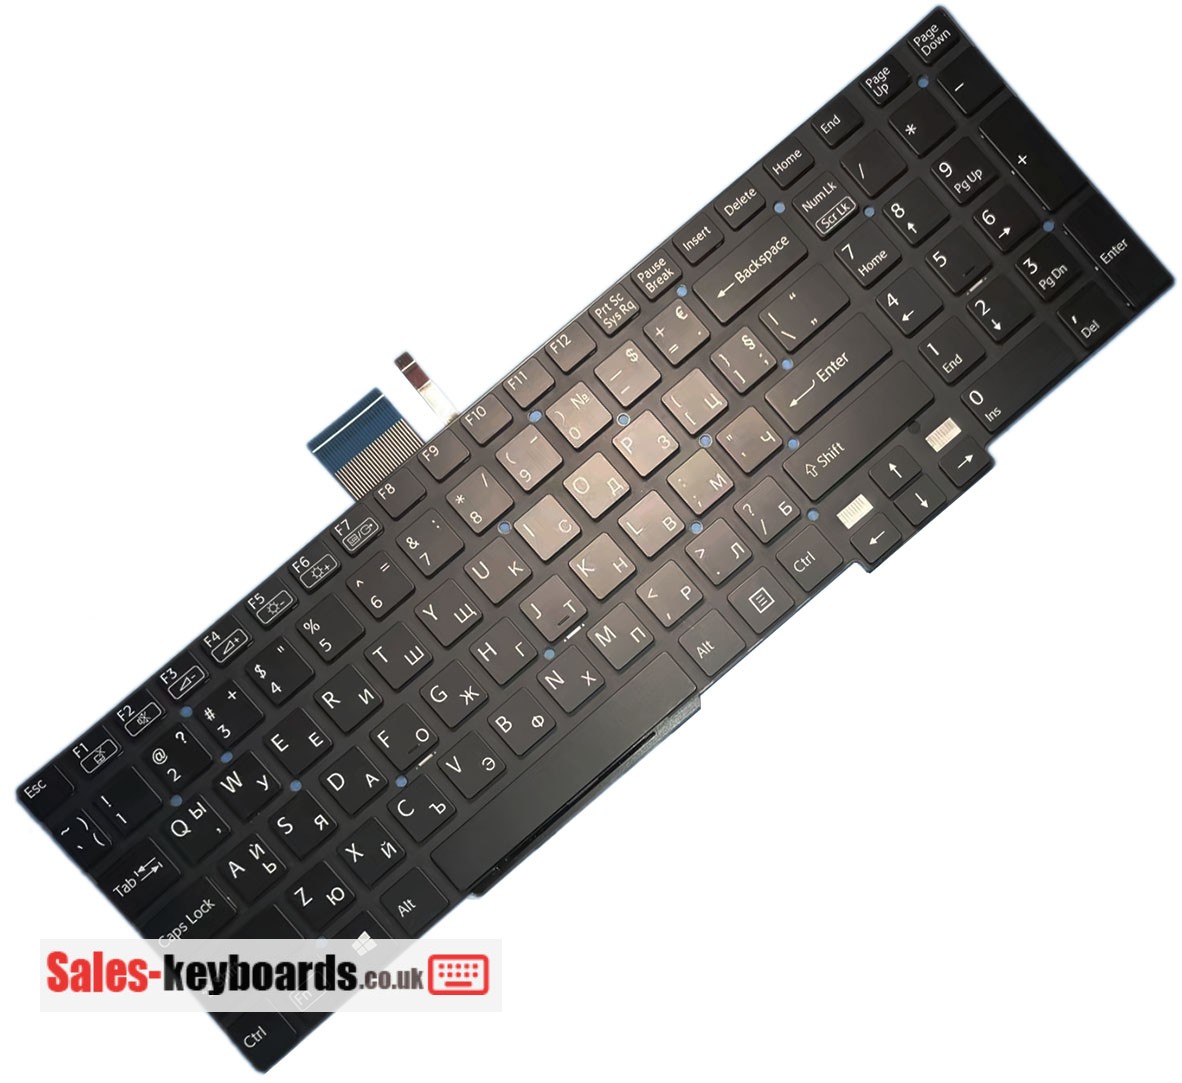 Sony VAIO SVT15 Series Keyboard replacement